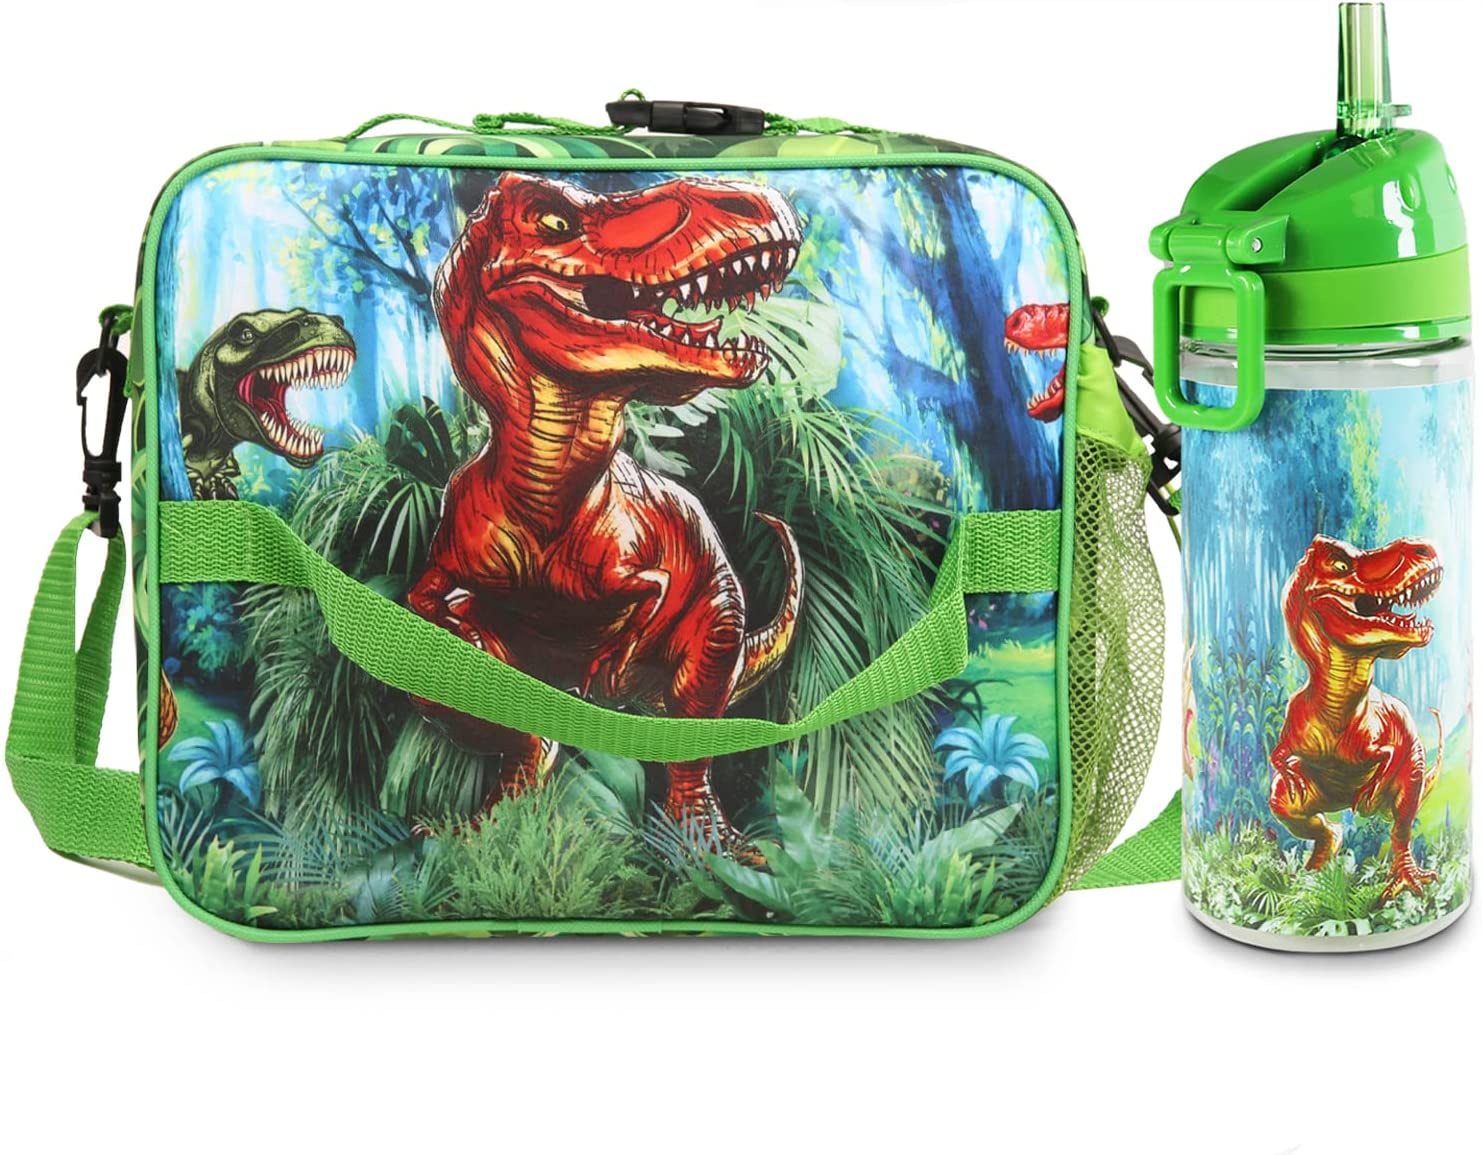 JOY2B Kids Lunch Bag - Insulated Dino Lunch Bag Kids with Water Bottle  Holder - Reusable Snack Bags …See more JOY2B Kids Lunch Bag - Insulated  Dino